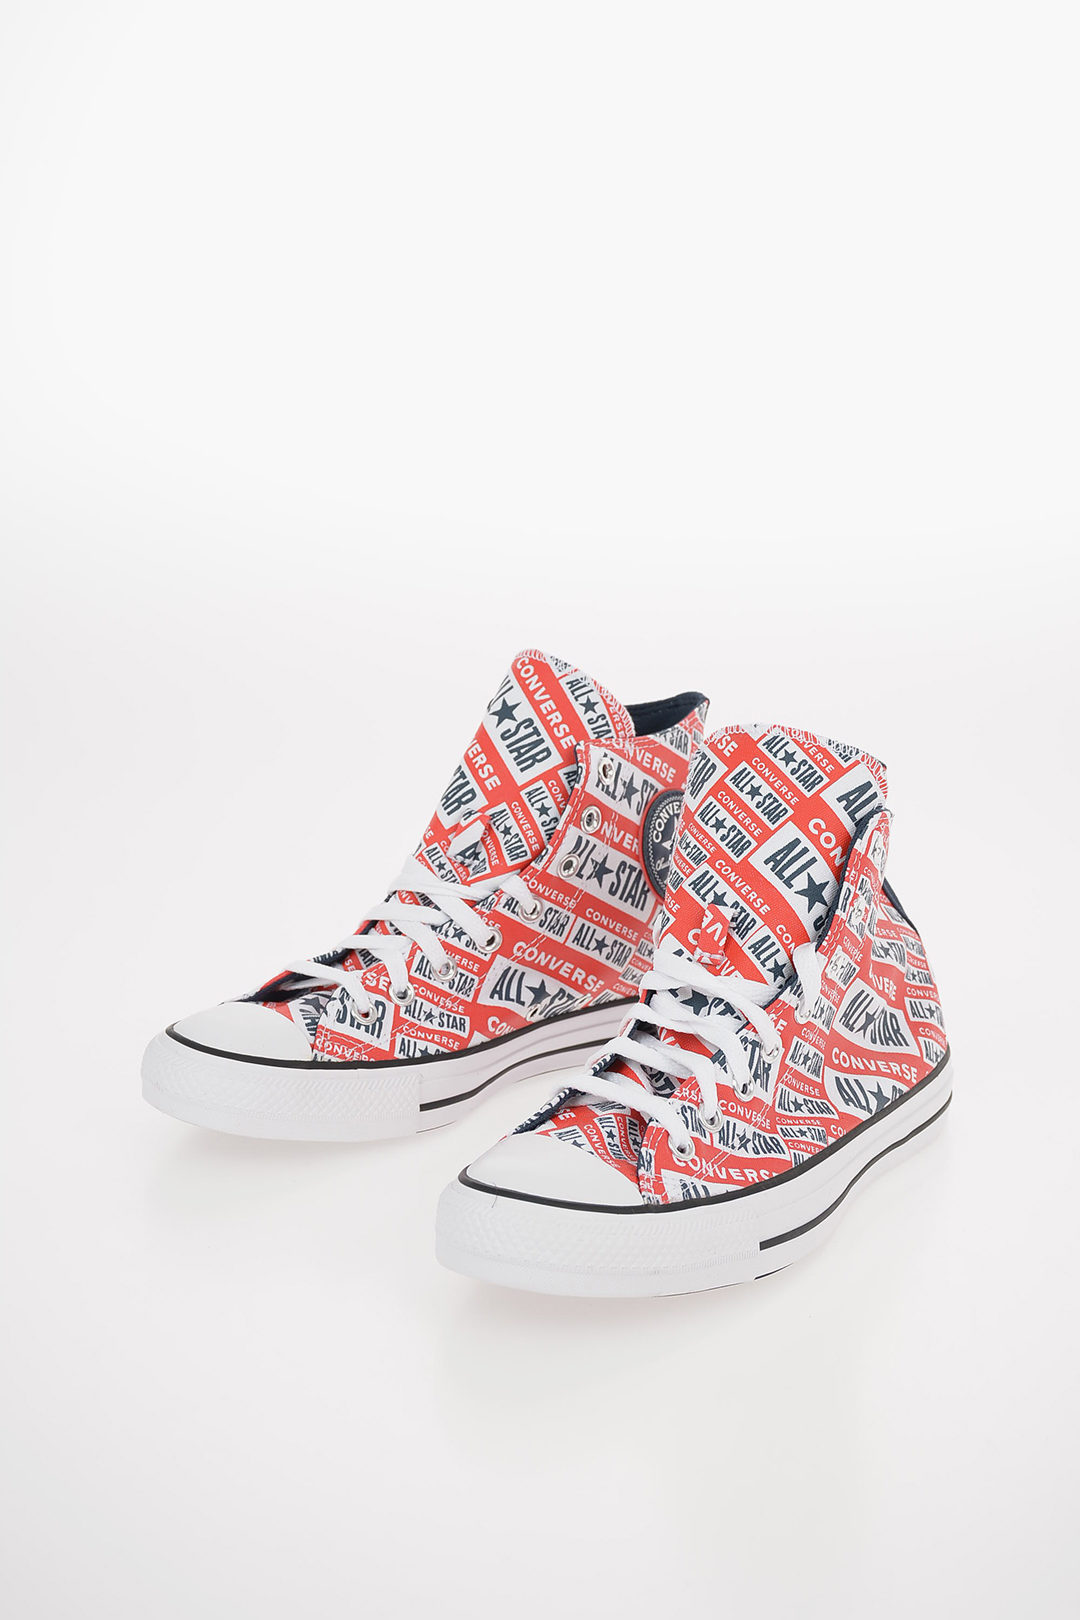 Louis Vuitton Brand Name And Logo Print Chuck Taylor All Star